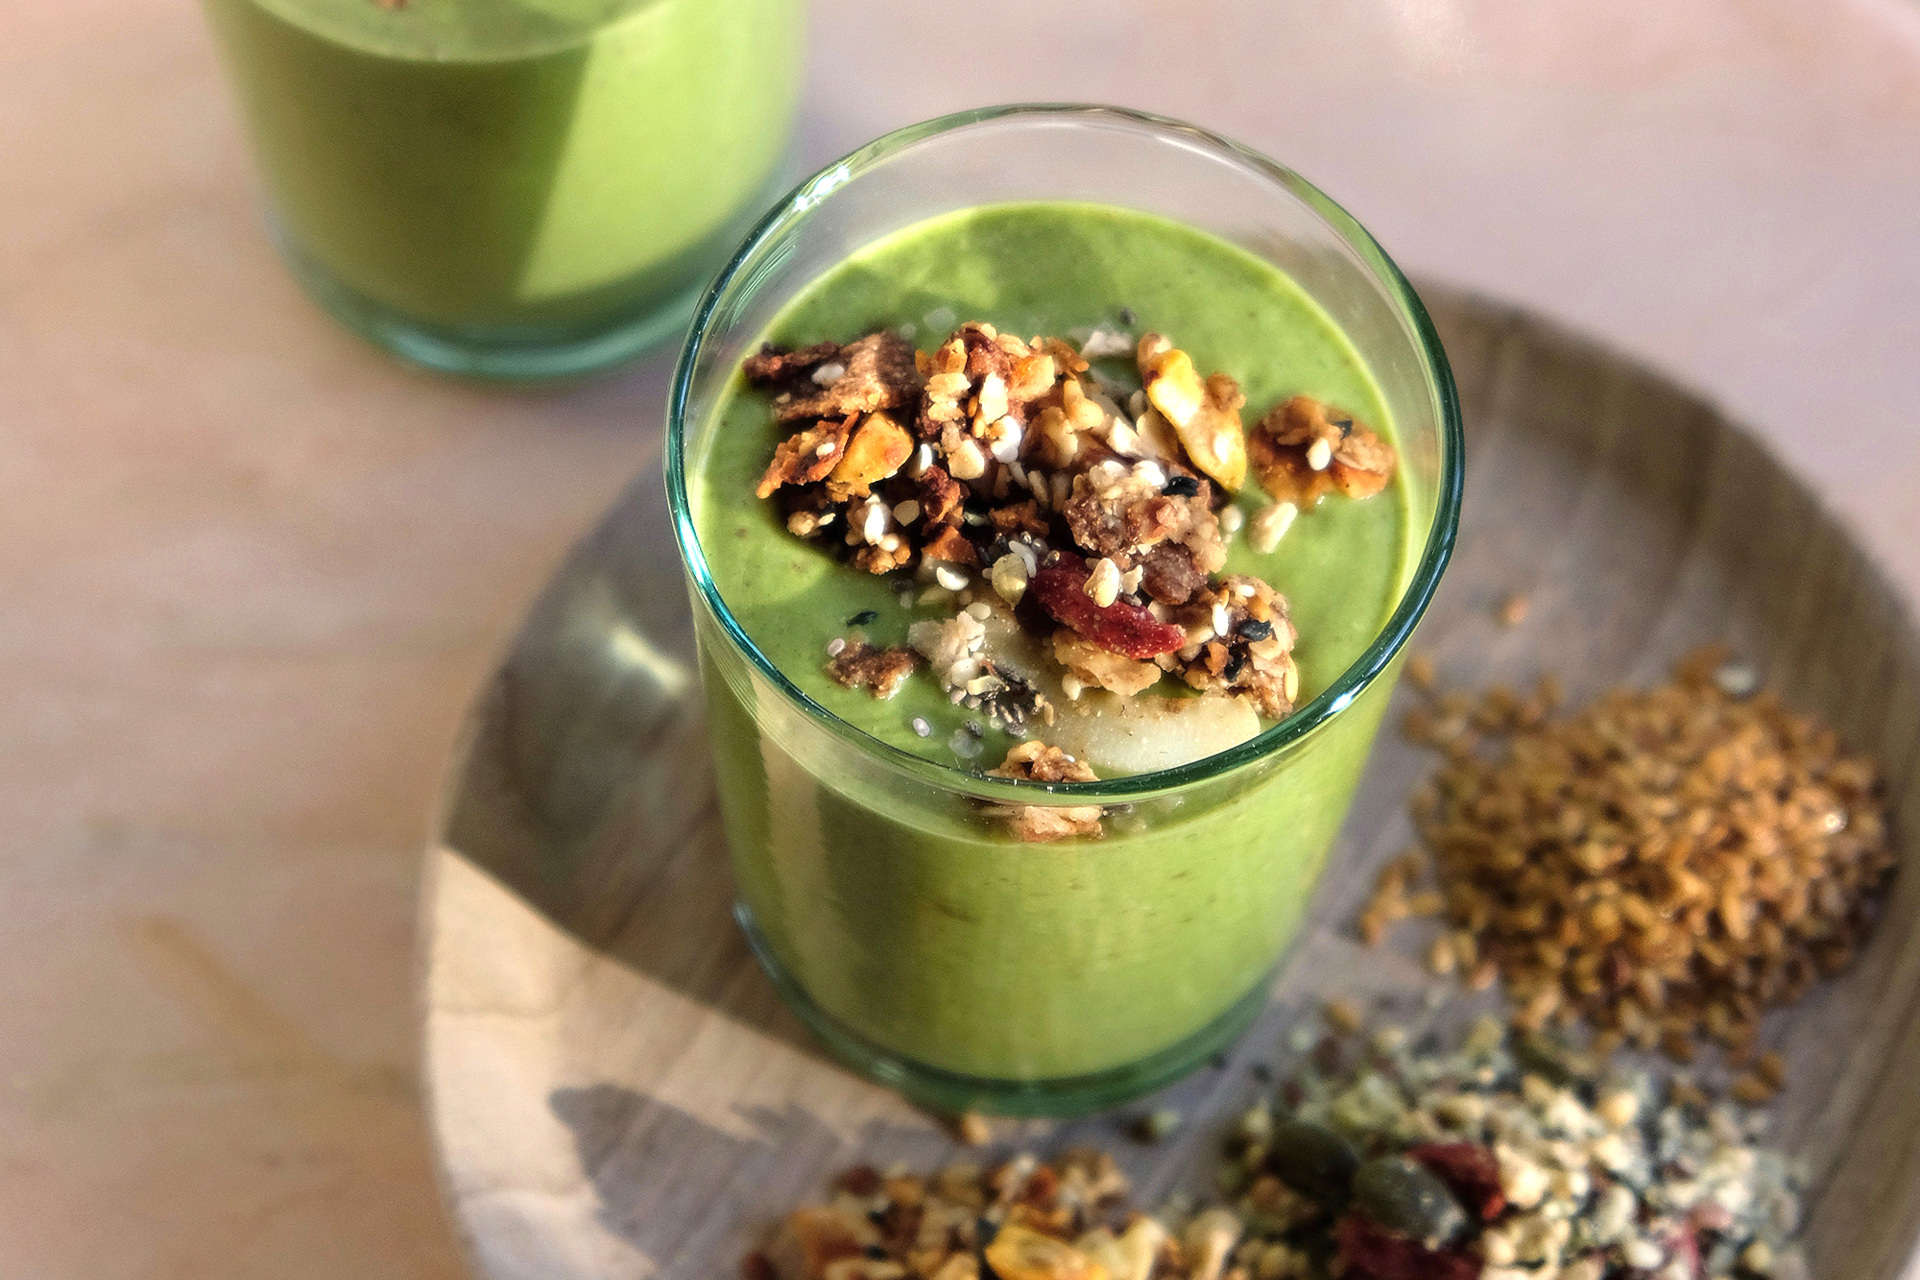 Wild By Tart's Ultimate Breakfast Smoothie - green smoothie in a glass surrounded by seeds